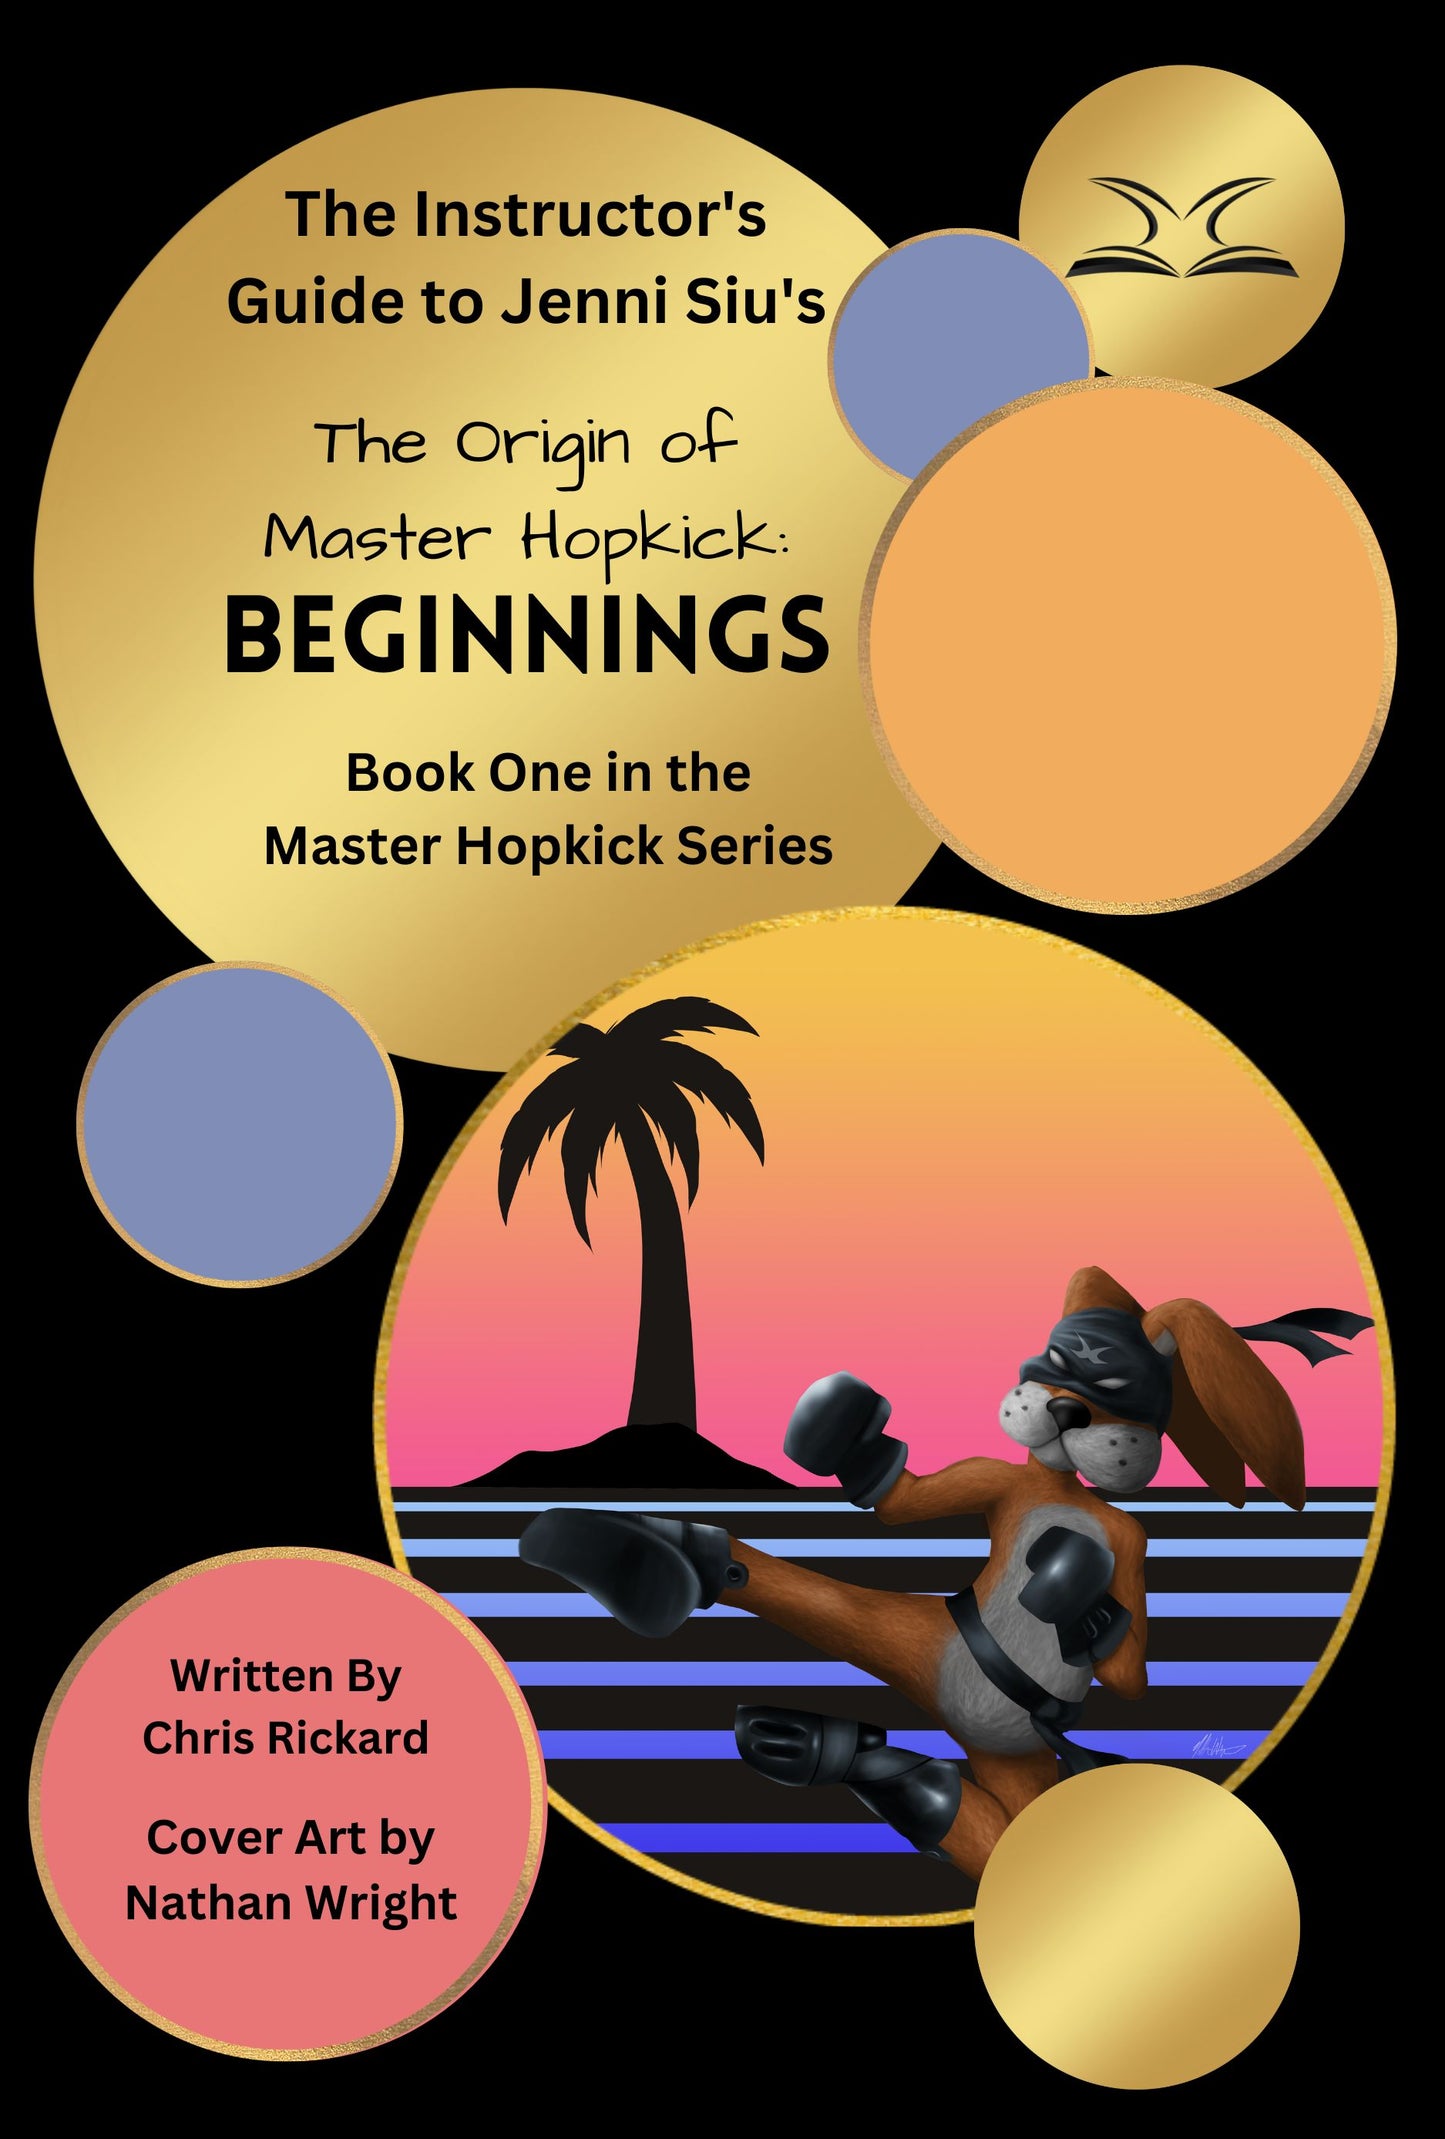 The Mat Chat and Classroom Discussion Guide to Jenni Siu's "The Origin of Master Hopkick: Beginnings" by Chris Rickard